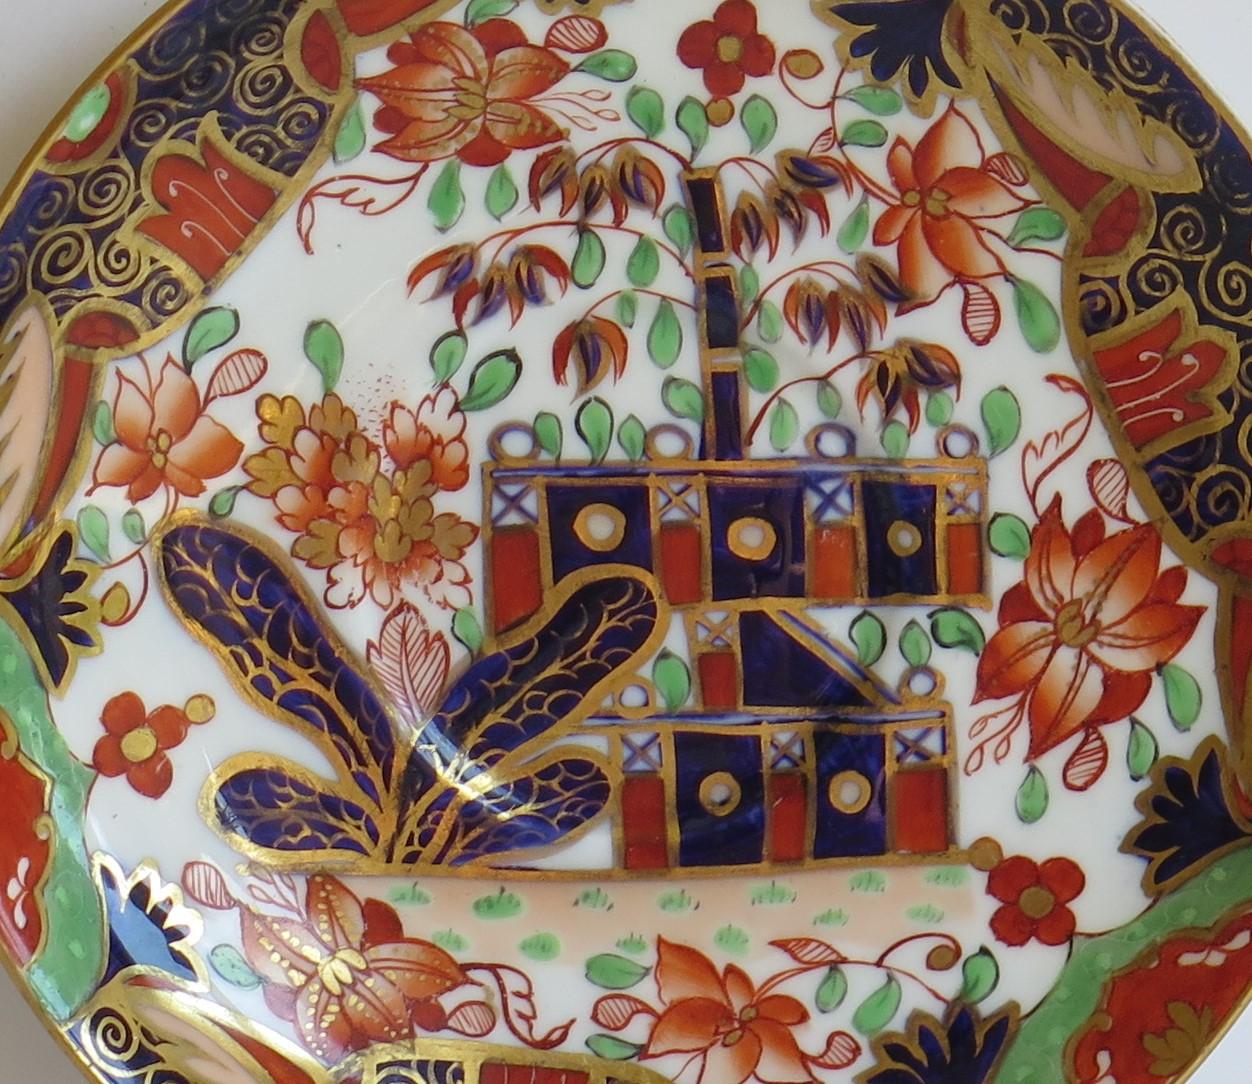 19th Century Porcelain Saucer Dish by Copeland 'Spode' in Imari Fence Ptn No. 794, circa 1850